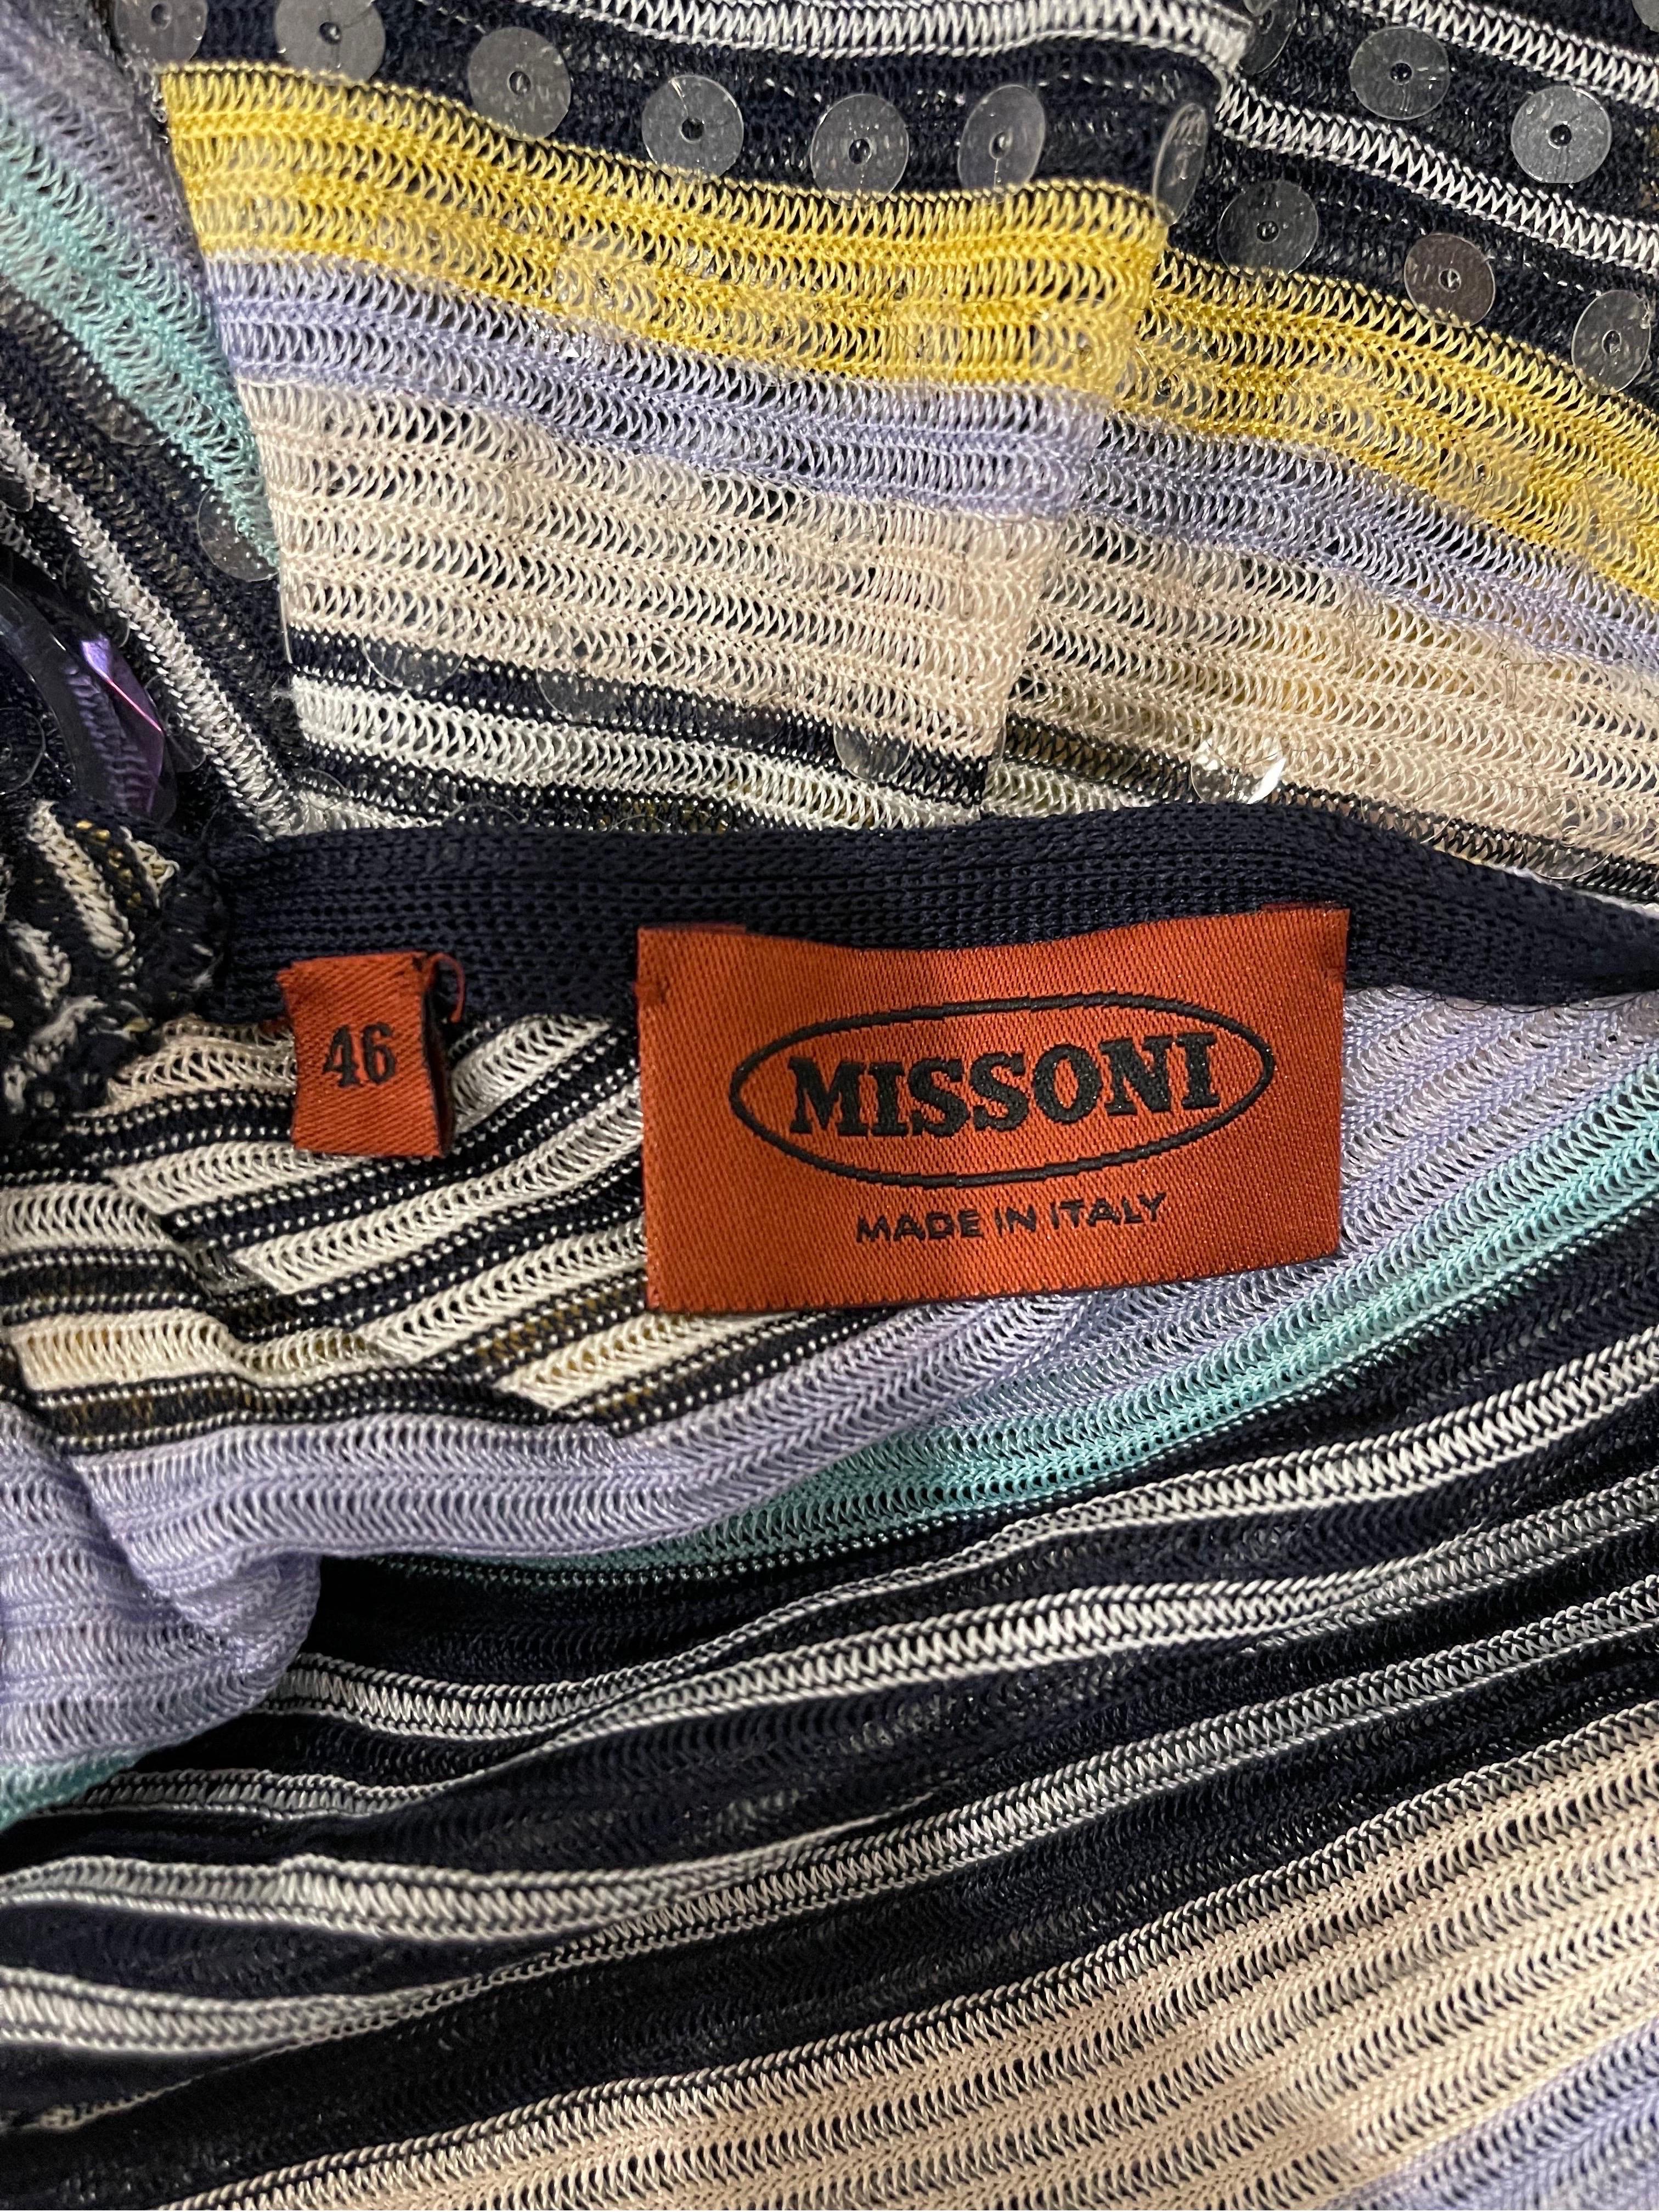 Never worn early 2000s MISSONI fully sequined striped knit halter dress ! Features vibrant colors of blue, turquoise, navy blue and yellow throughout. Thousands of hand-sewn clear sequins sparkle with movement. Simply slips over the head and